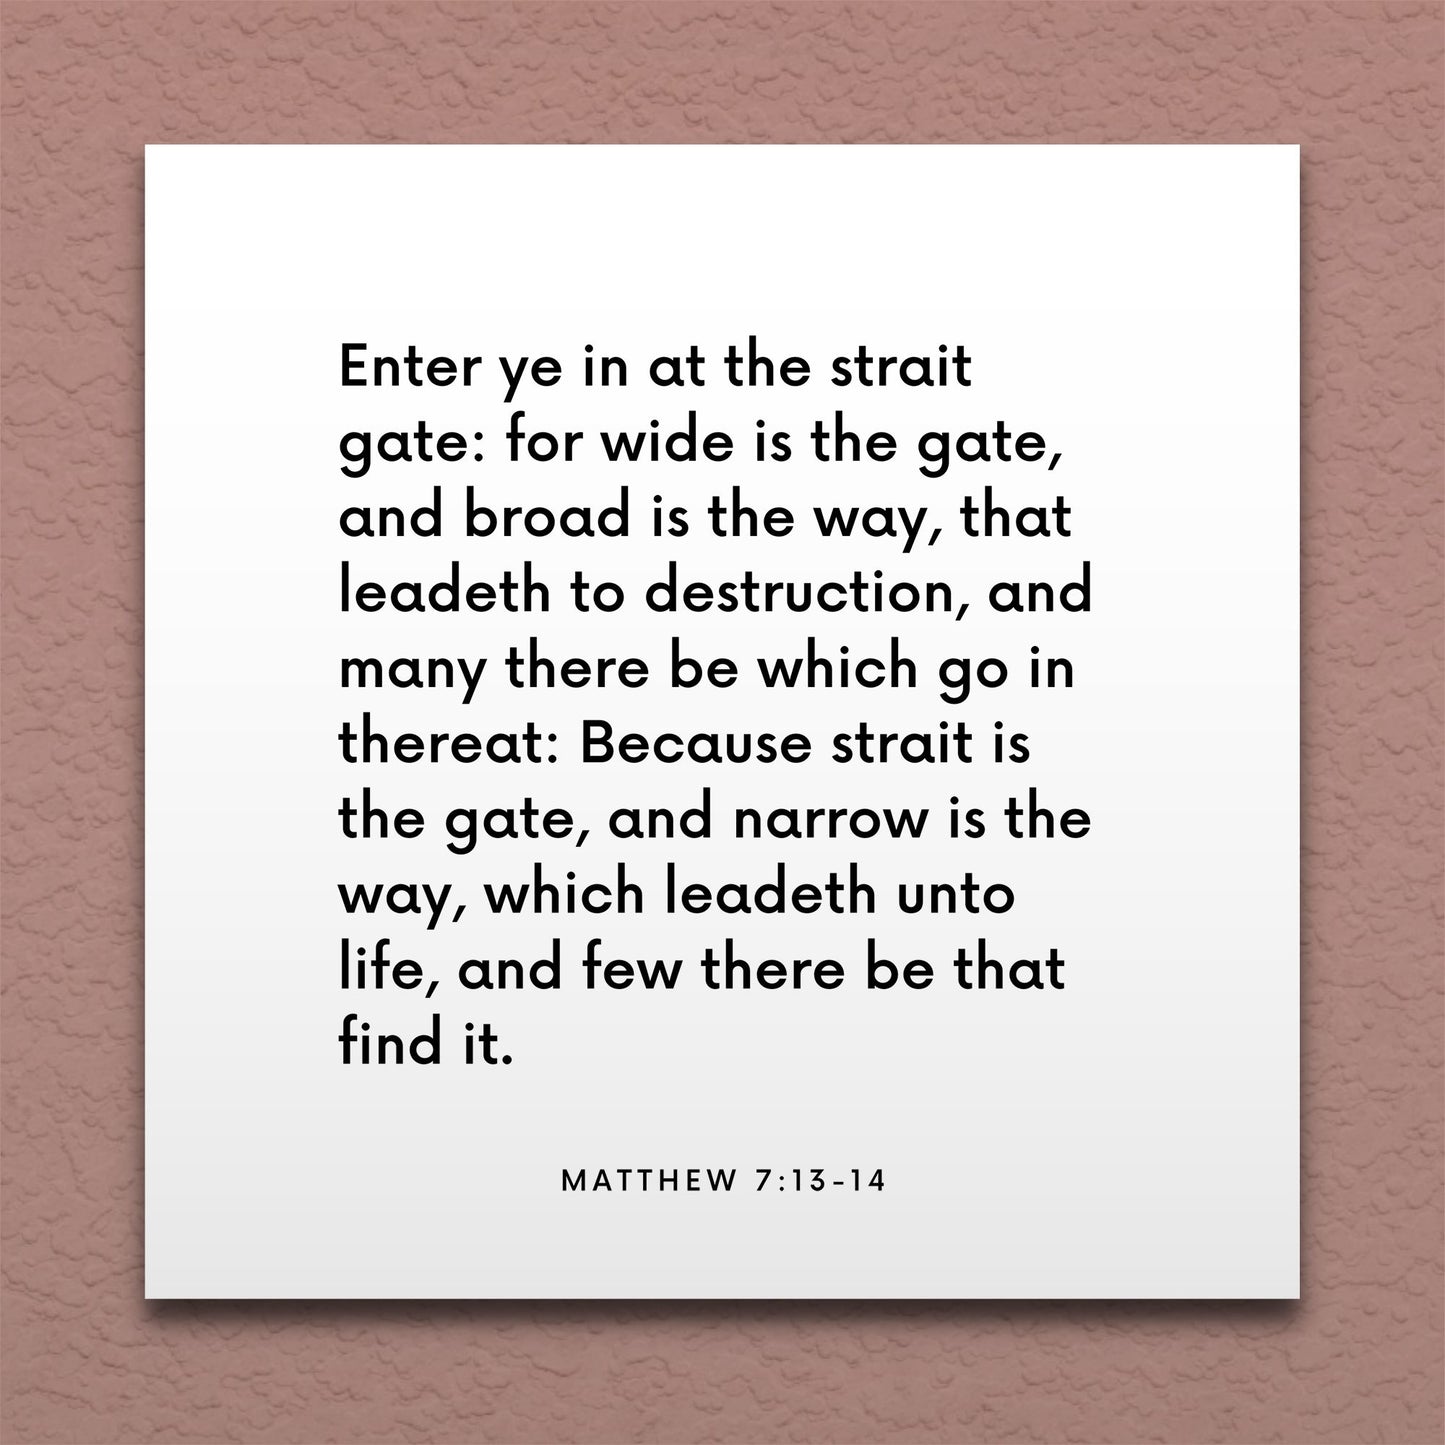 Wall-mounted scripture tile for Matthew 7:13-14 - "Strait is the gate, and narrow is the way"